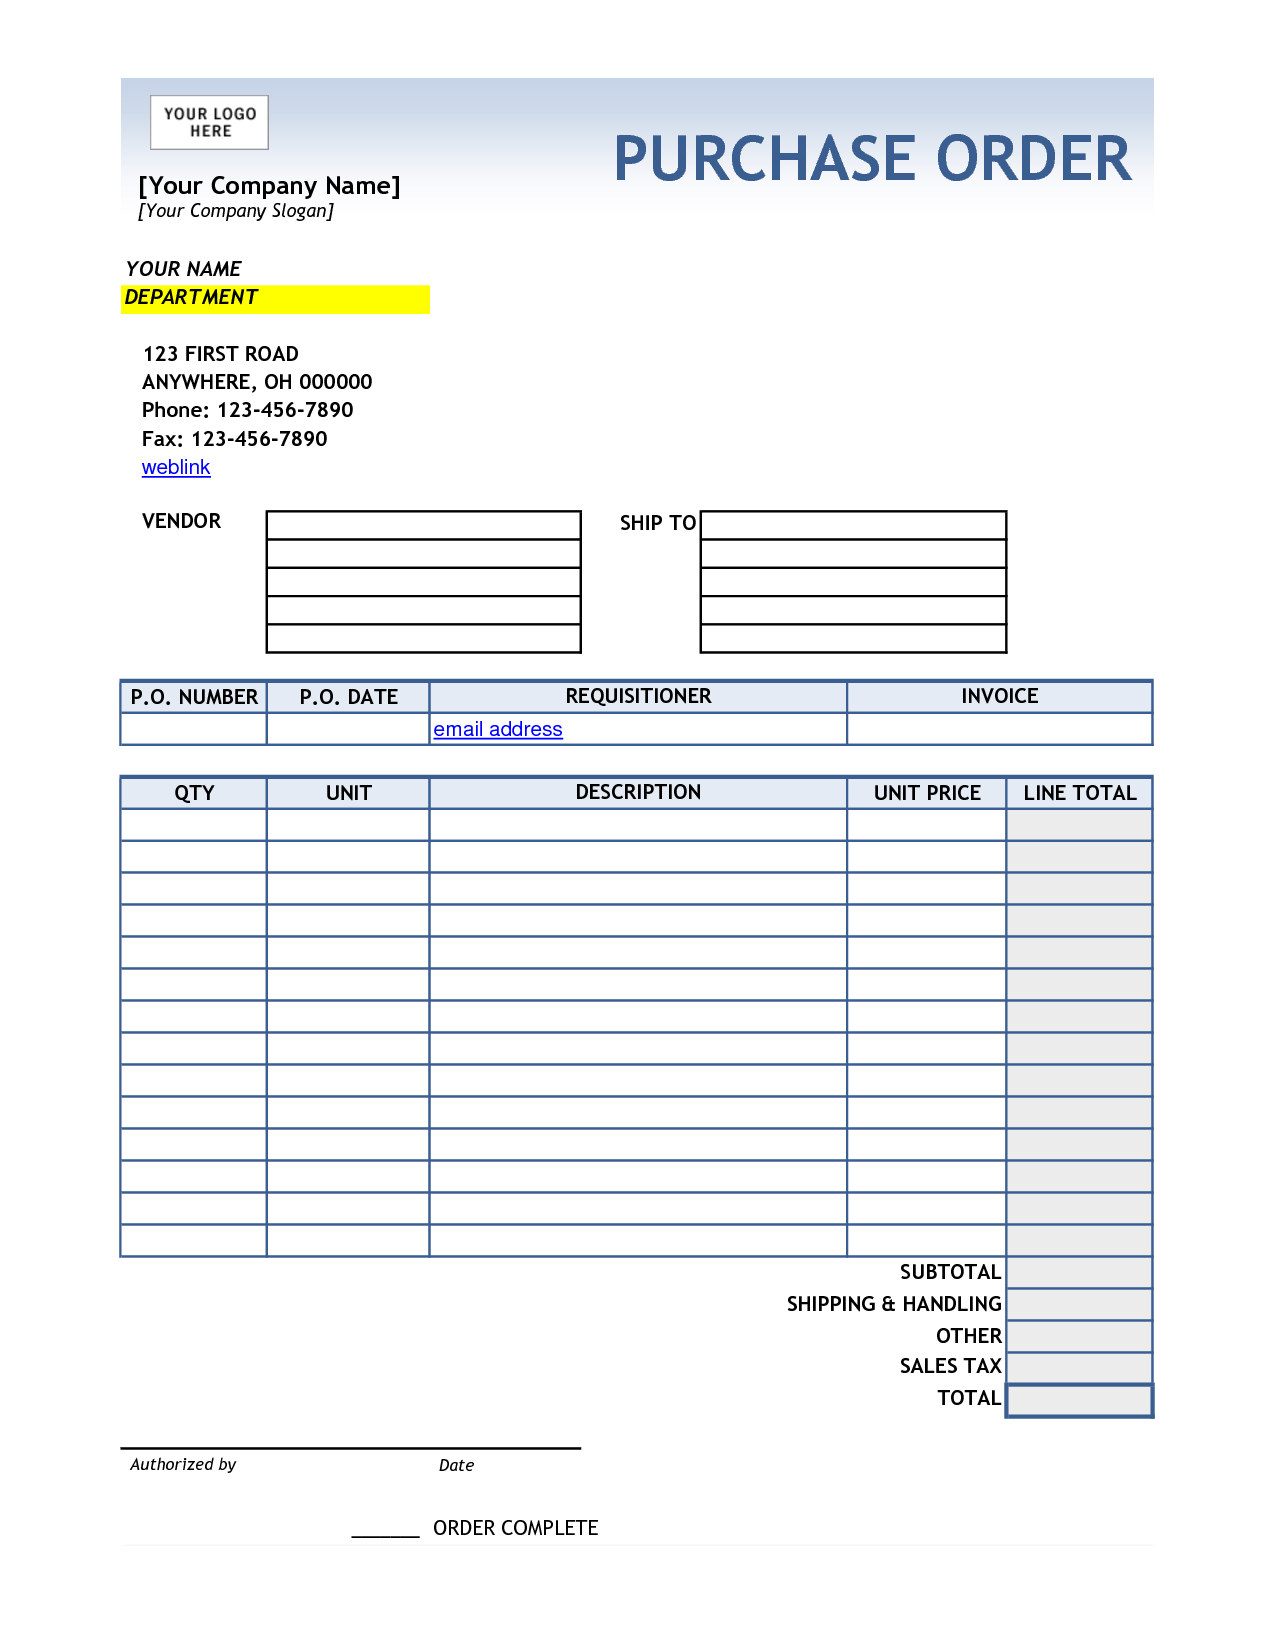 Purchase Order Template Excel Download